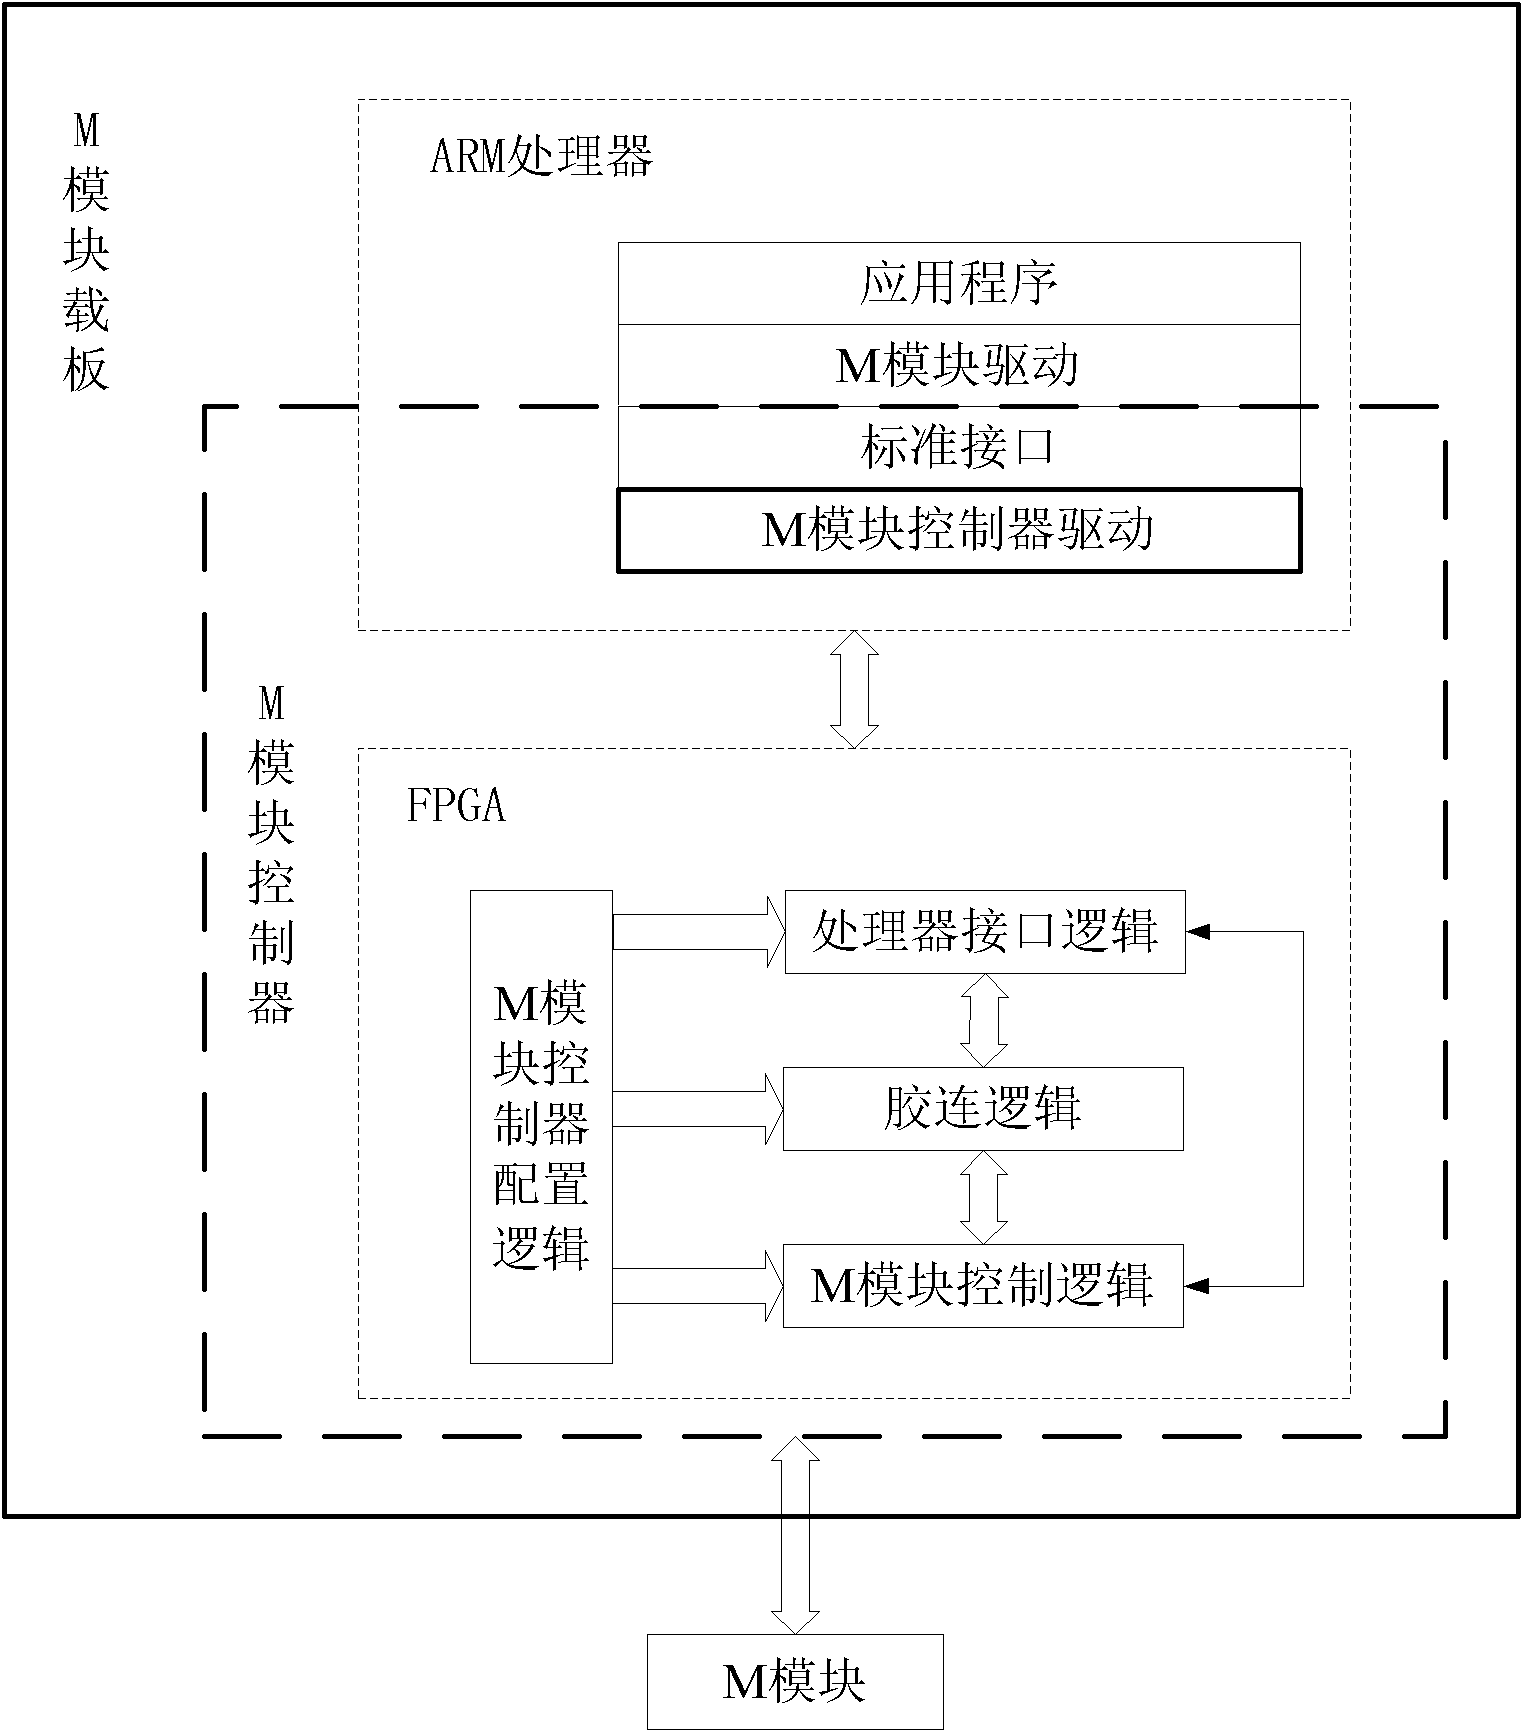 M module low-level (LL) driver layer realization method for M module-based local area network (LAN)-based extensions for instrumentation (LXI) equipment